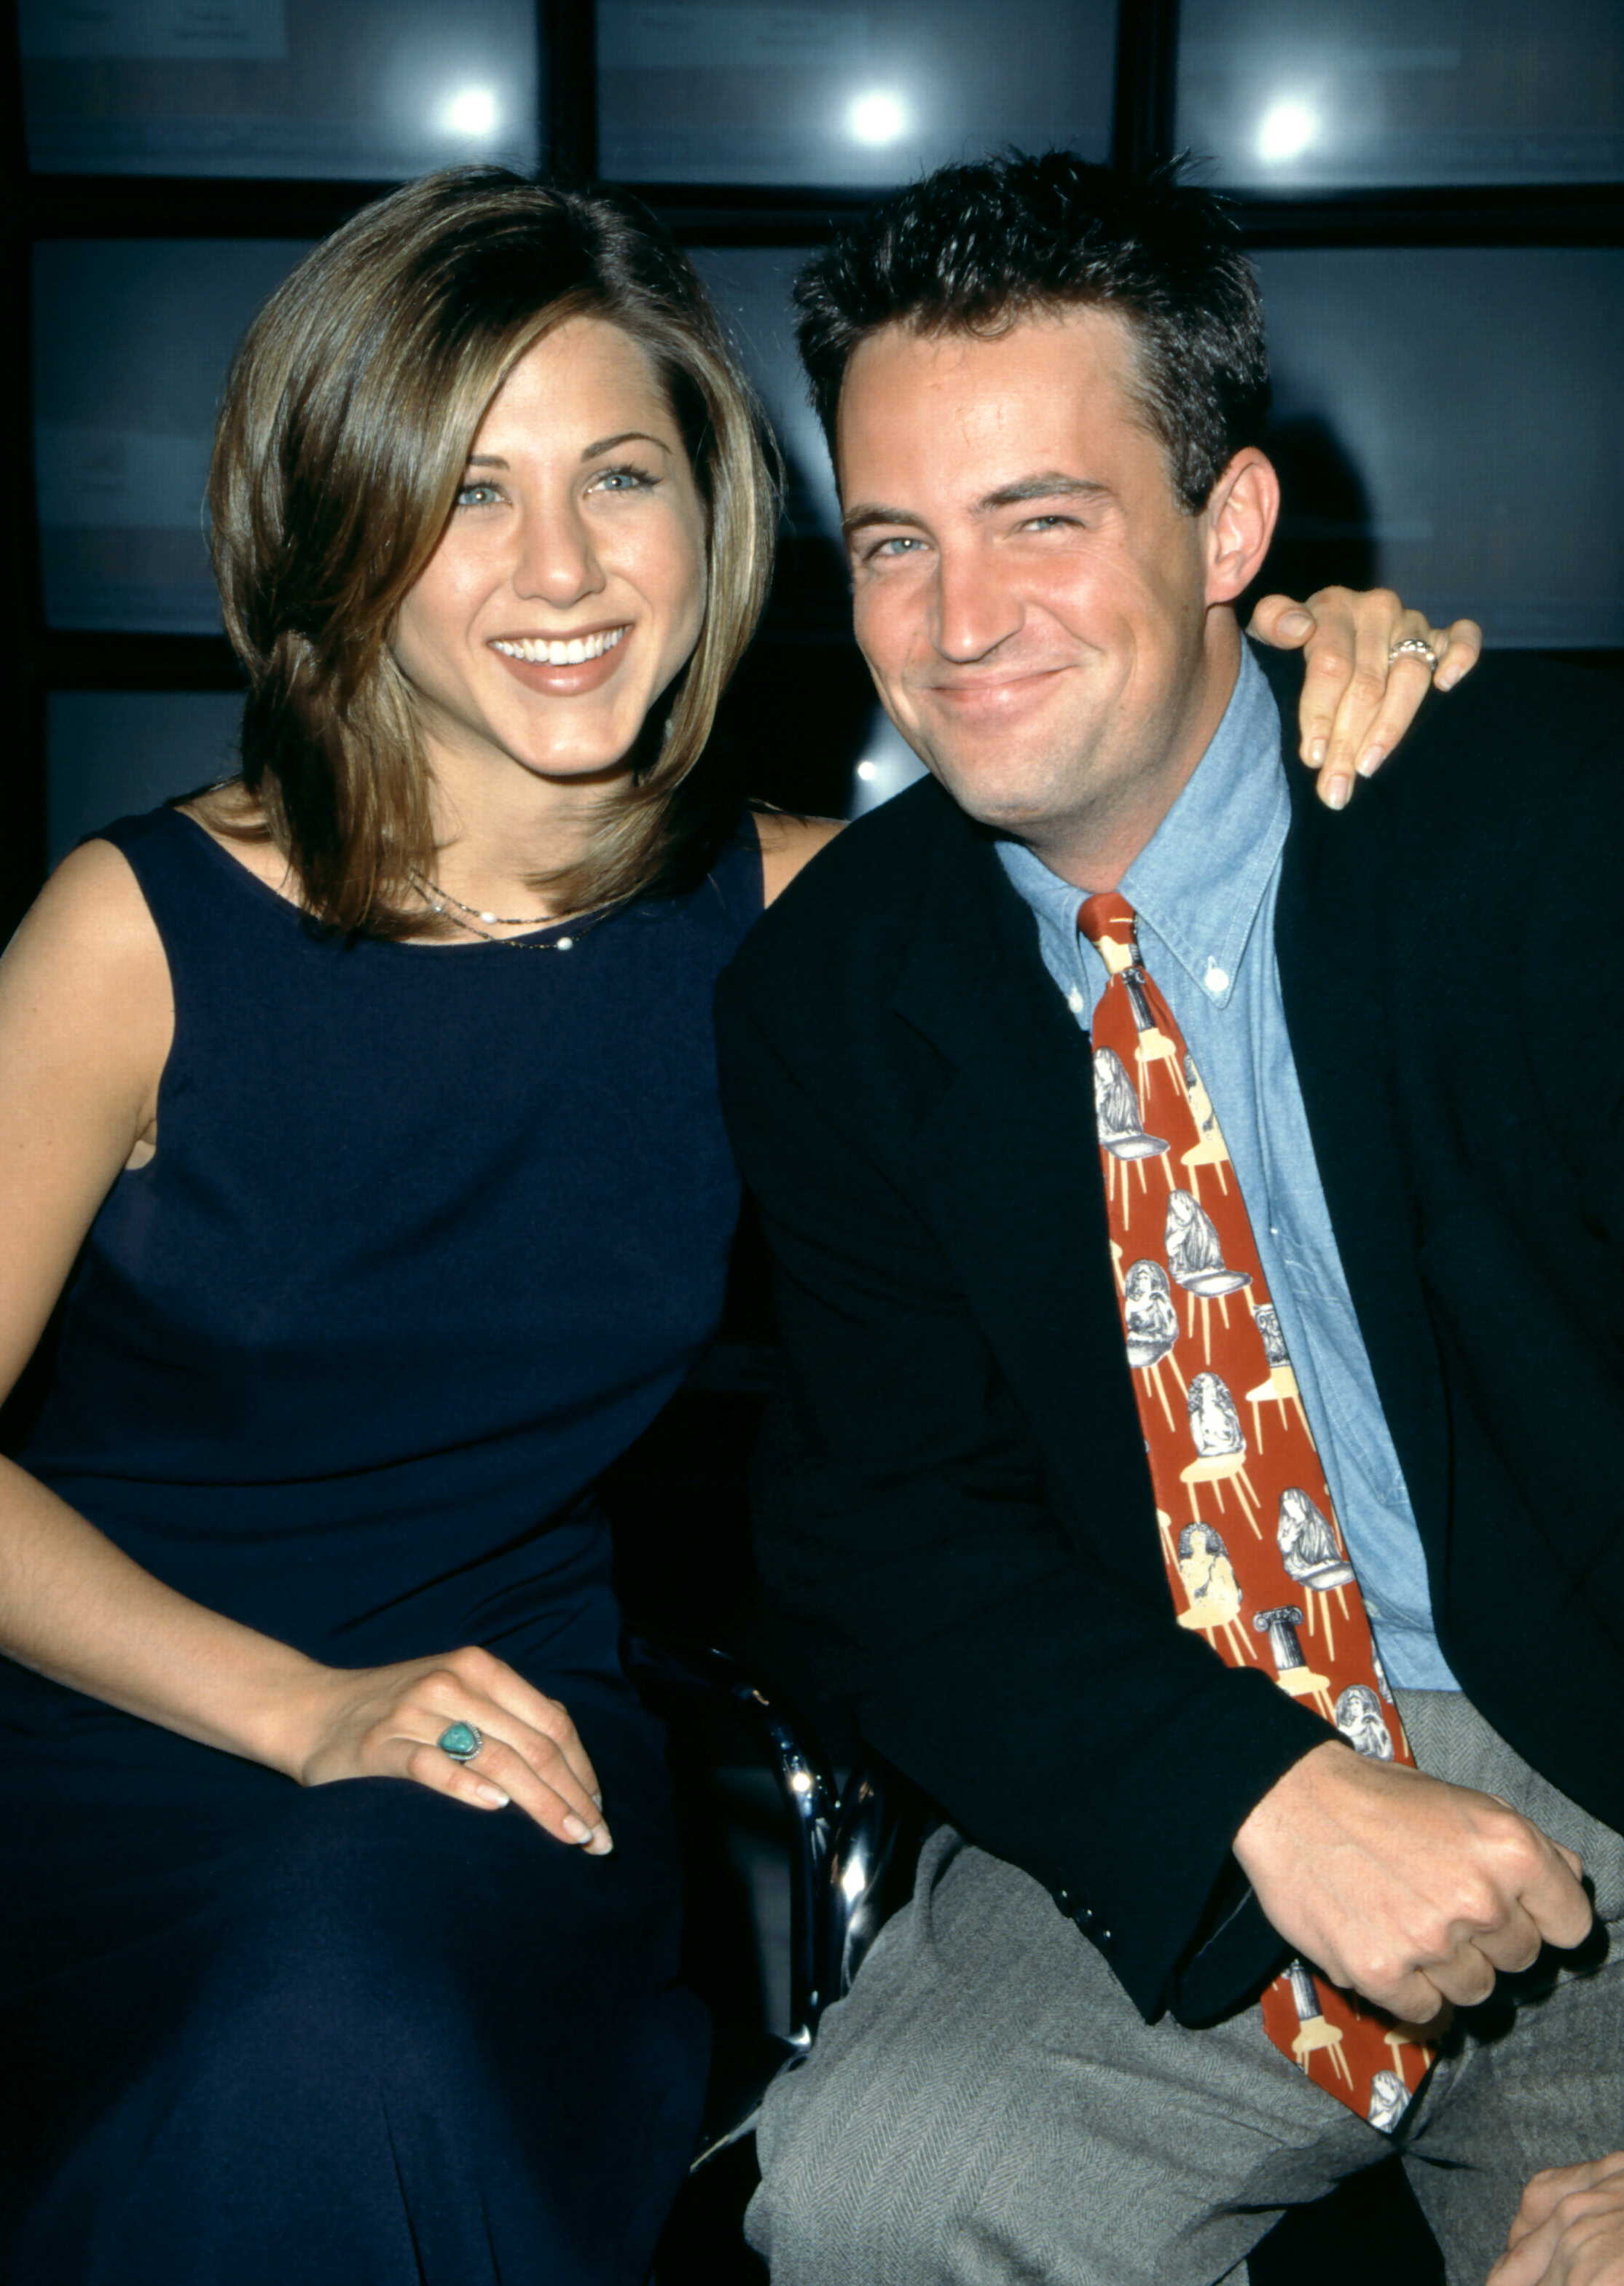 Jennifer Aniston shares one way she's honoring Matthew Perry's legacy